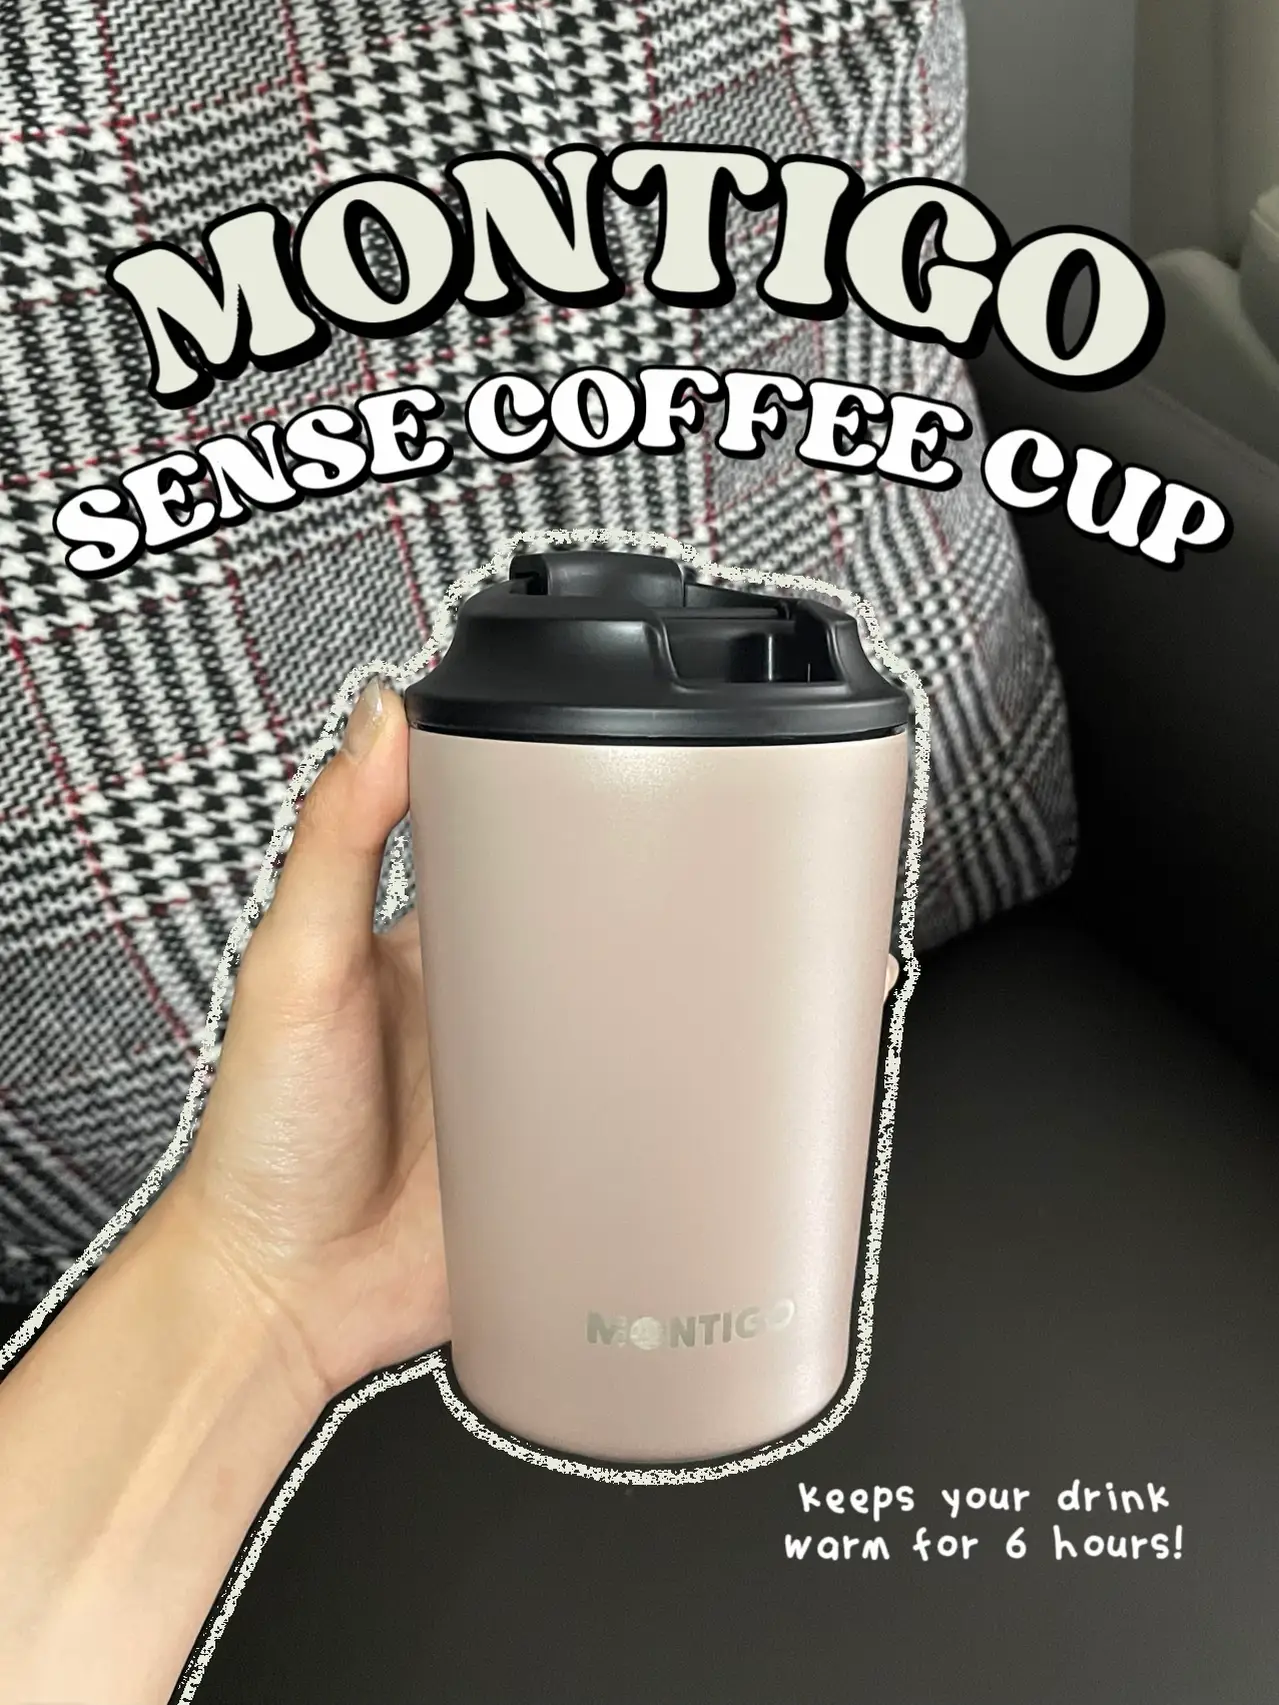 12oz Coffee Cup, Stainless Steel Insulated Cup, Portable Car-mounted Water  Cup, Creative Flip-top Direct Drinking Coffee Cup, 1 Pack